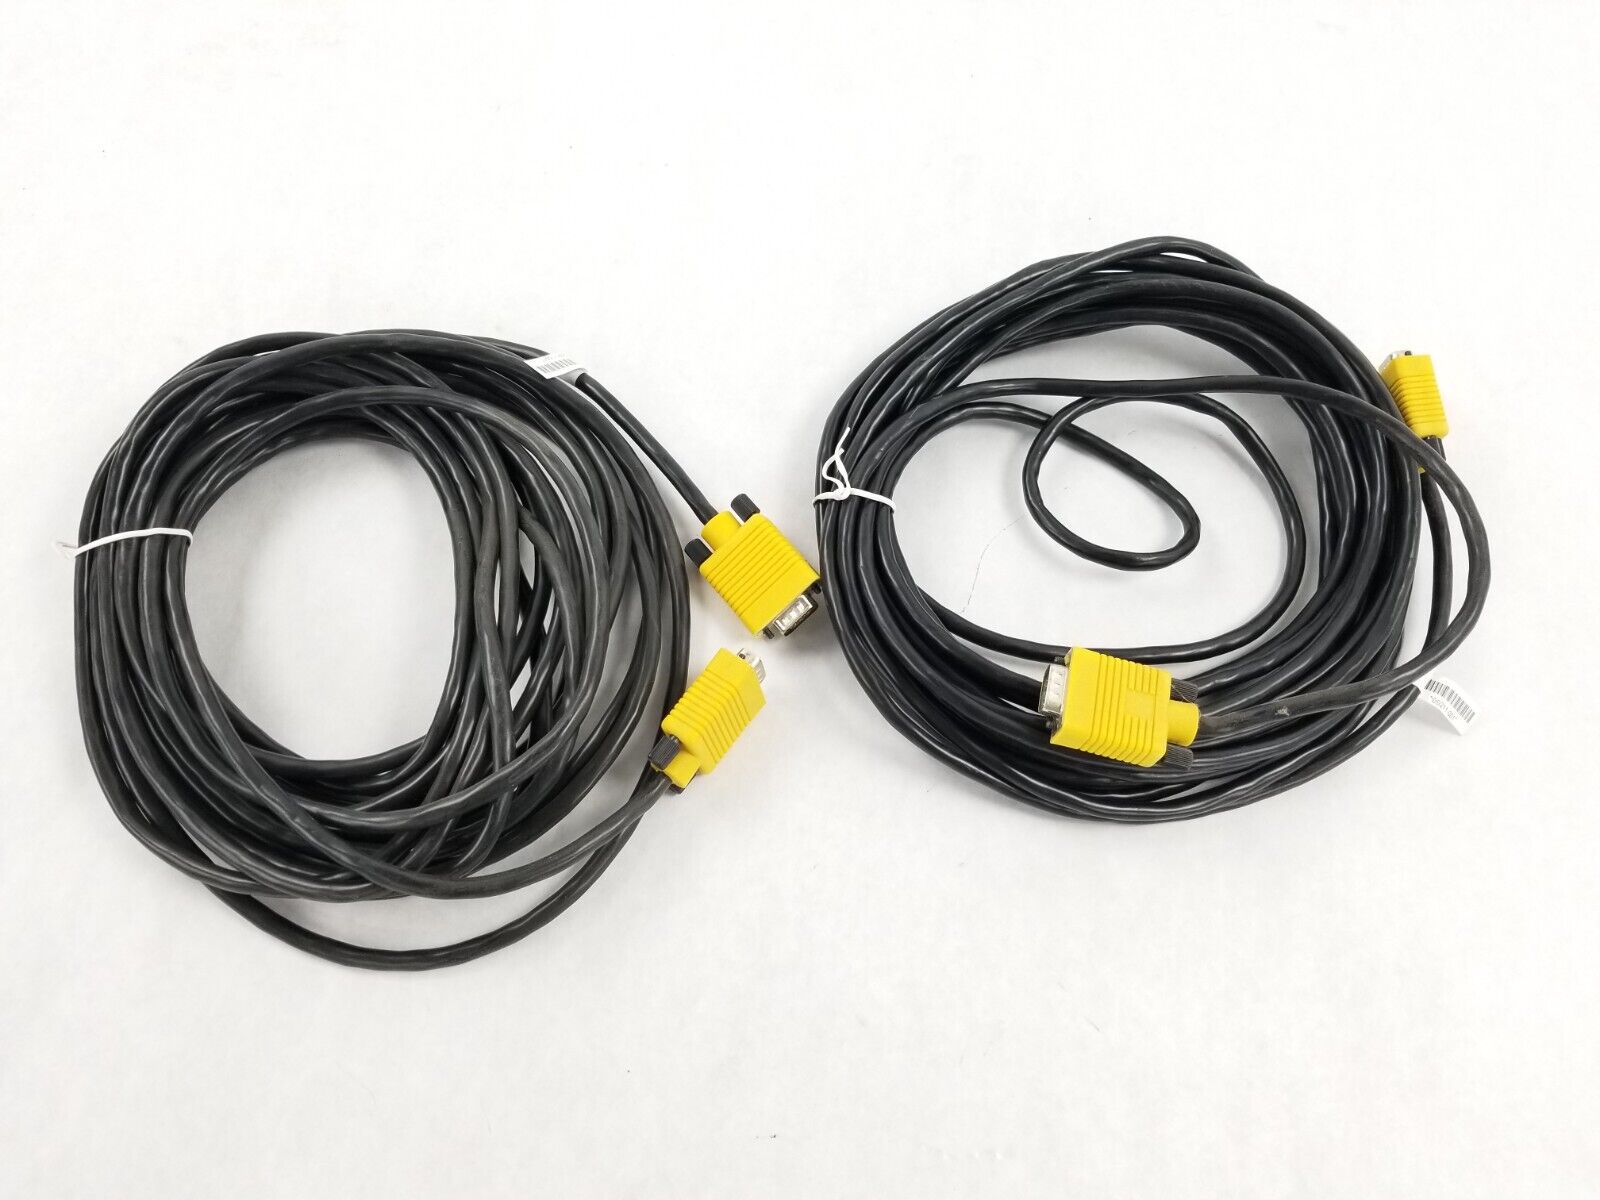 Lot of (2) Polycom Male to Male VGA Cable 25ft for VS4000 (P/N:09211-001)